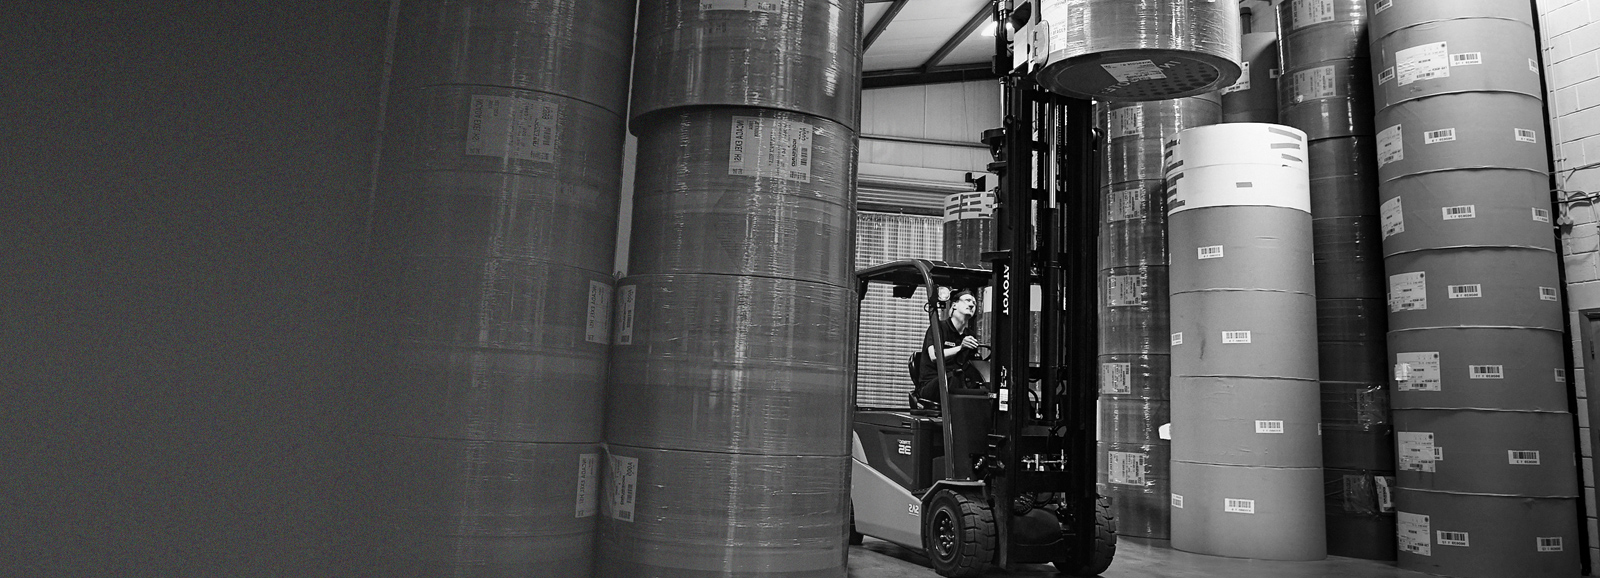 Production worker in a warehouse using a forklift to move large reels of printing paper